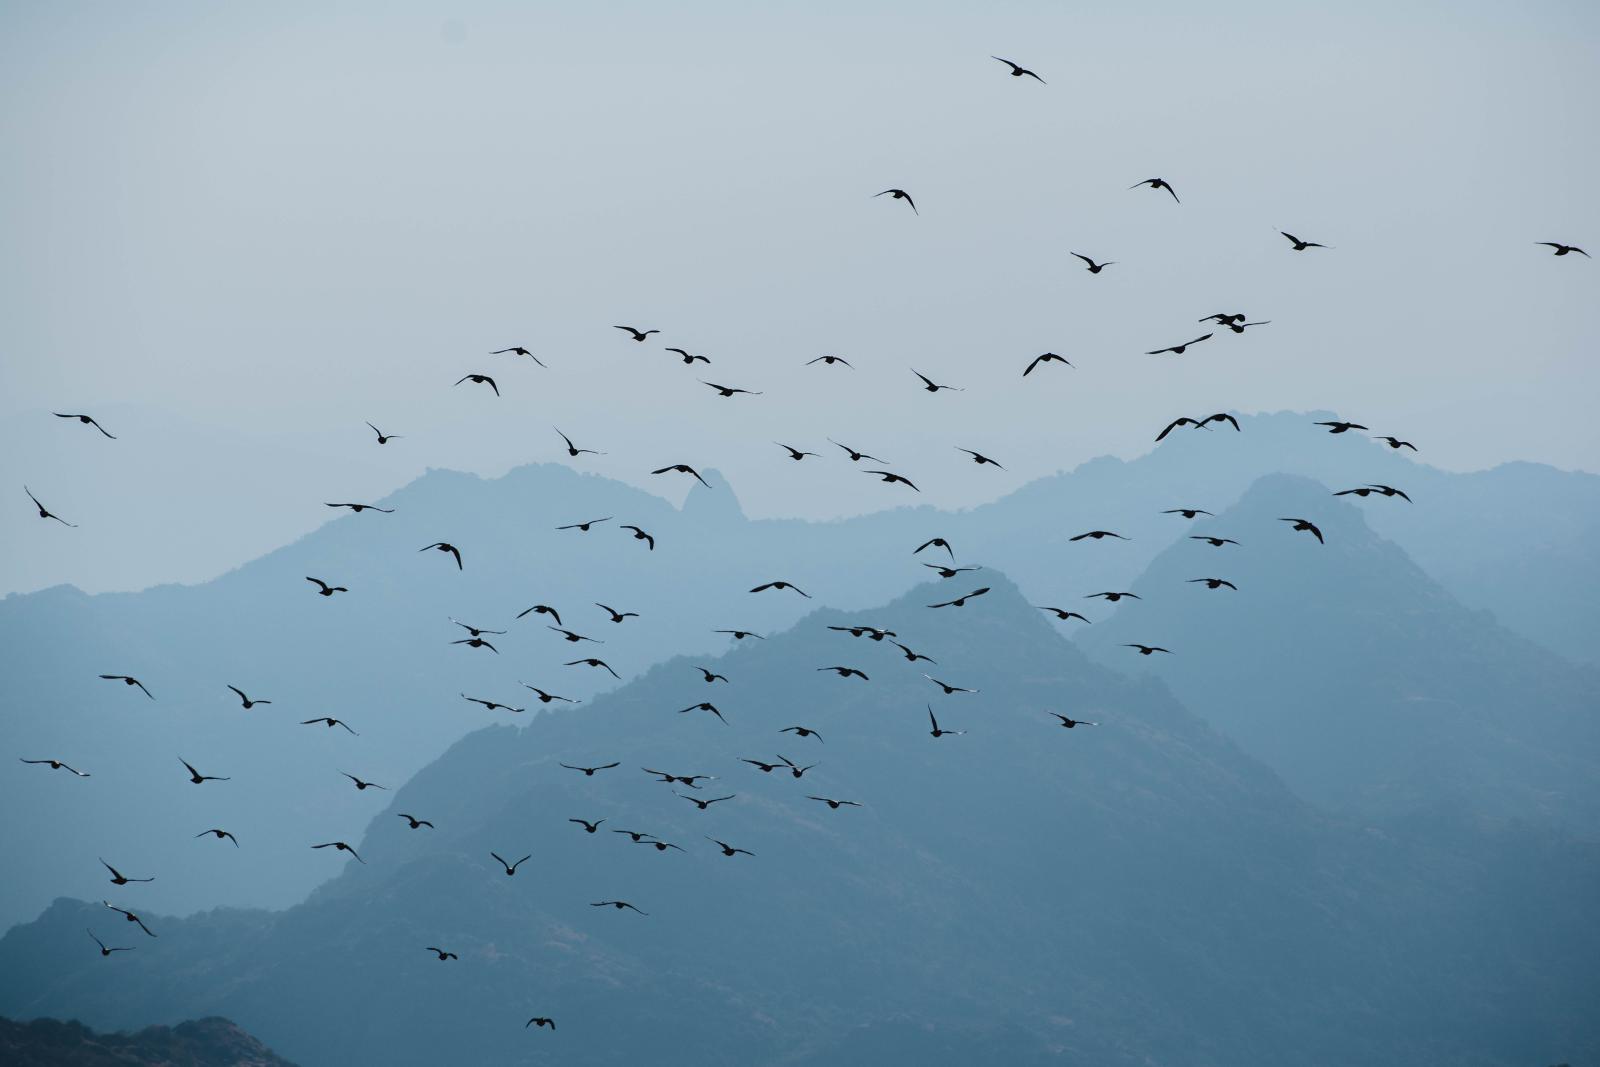 flock of birds with mountains and grey sky